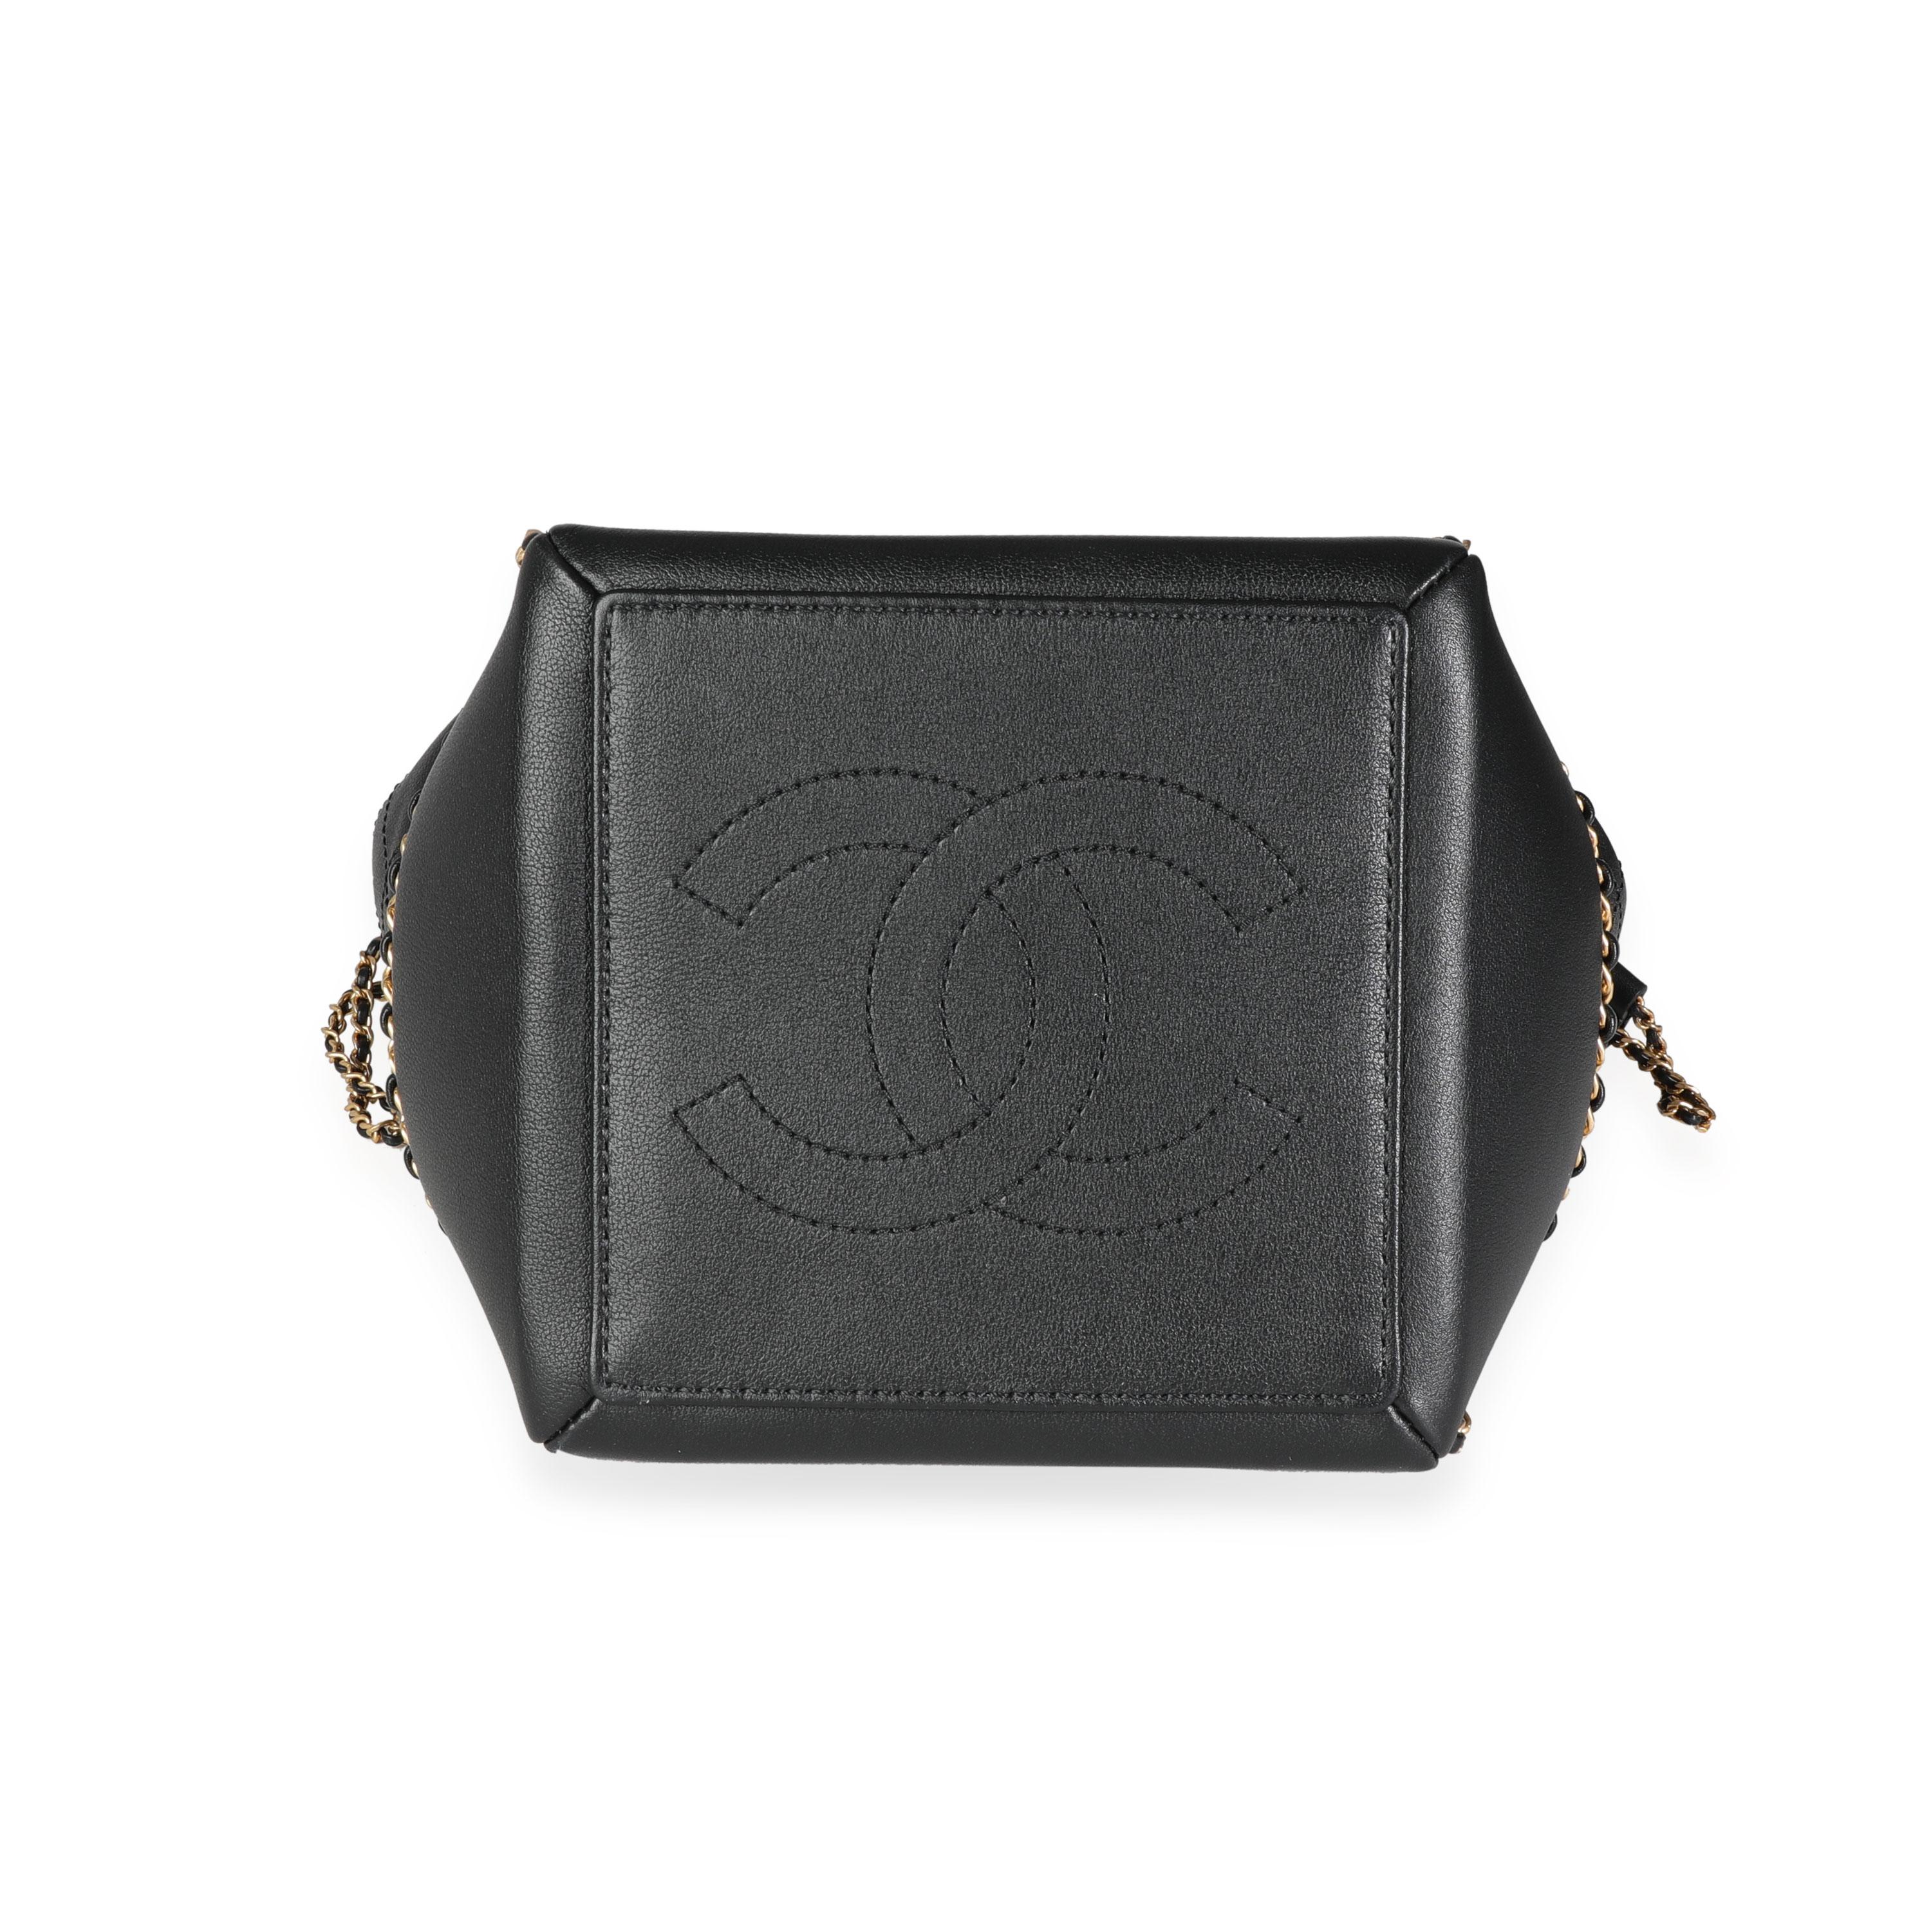 Chanel Black Quilted Calfskin Chain Drawstring Bag 2